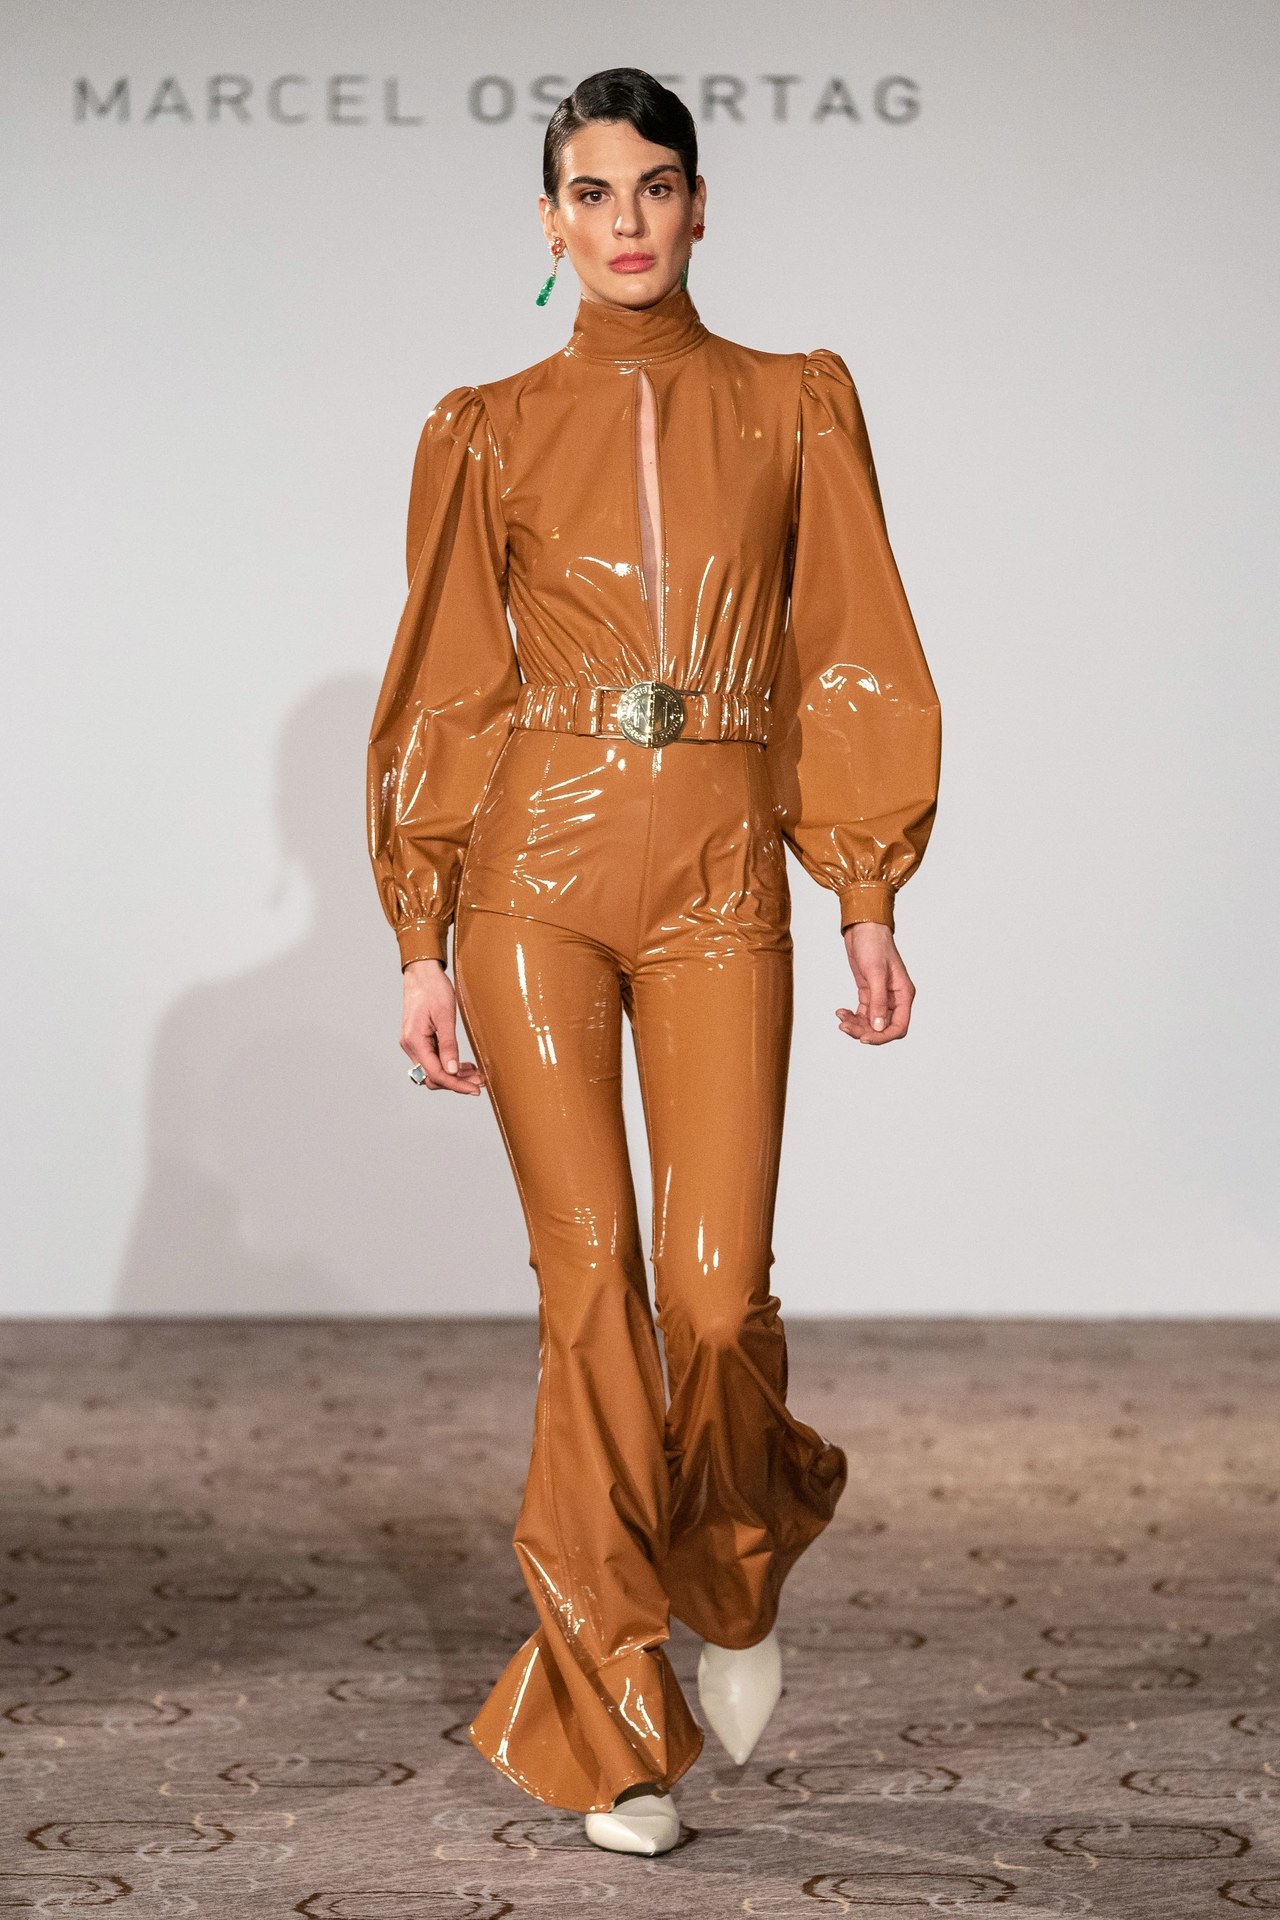 Marcel Ostertag Fall Winter 2020-21 Fashion Show